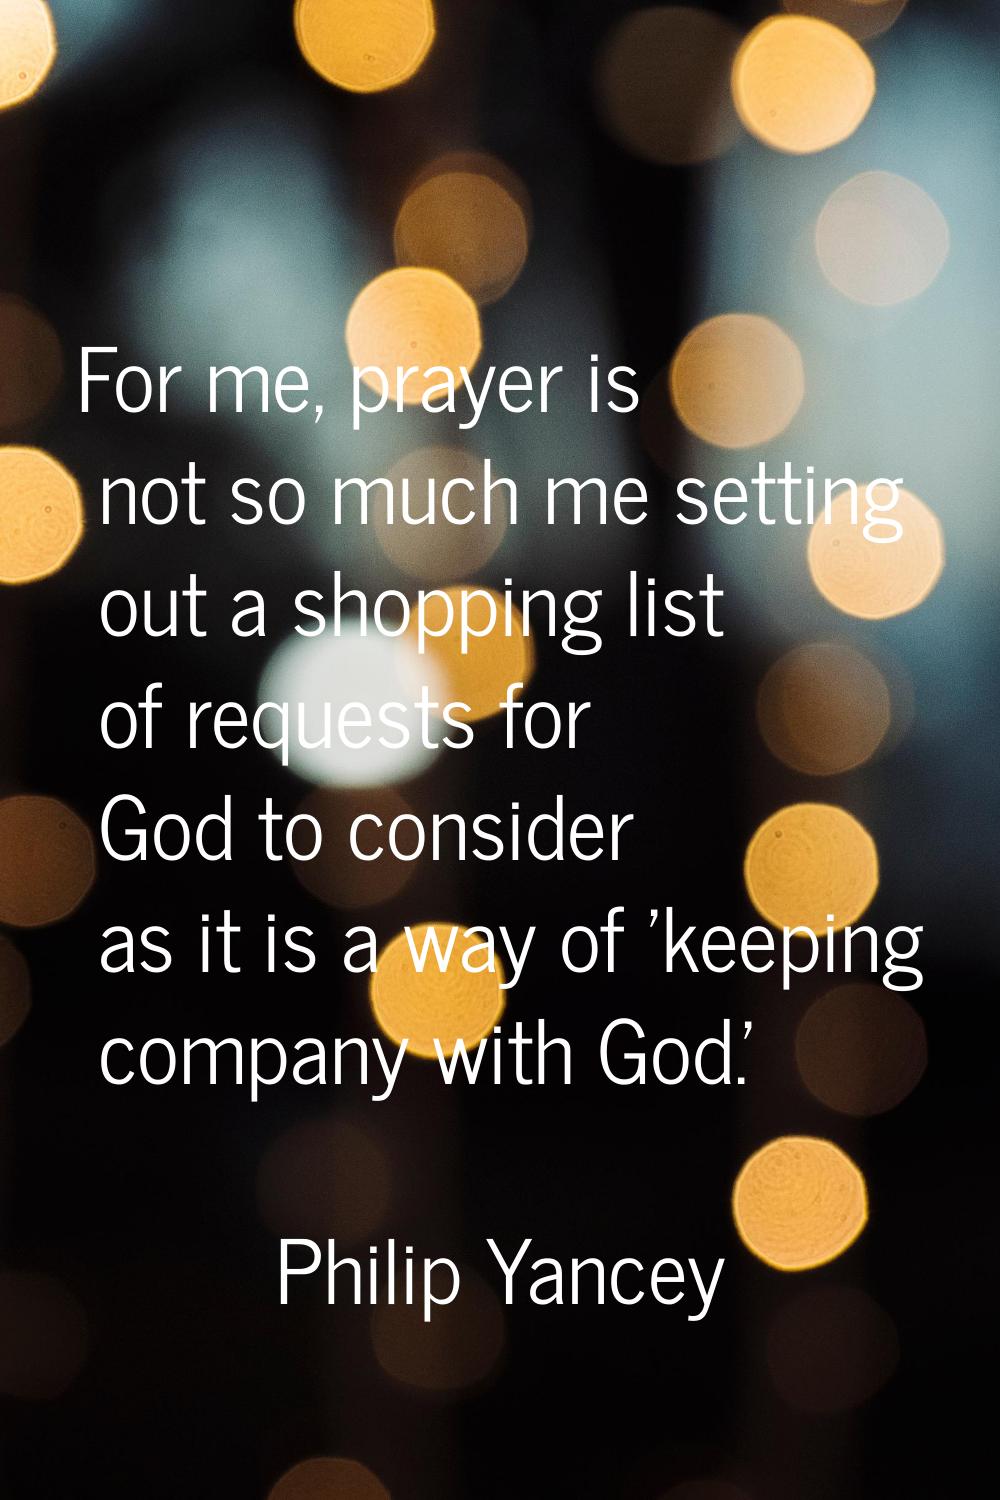 For me, prayer is not so much me setting out a shopping list of requests for God to consider as it 